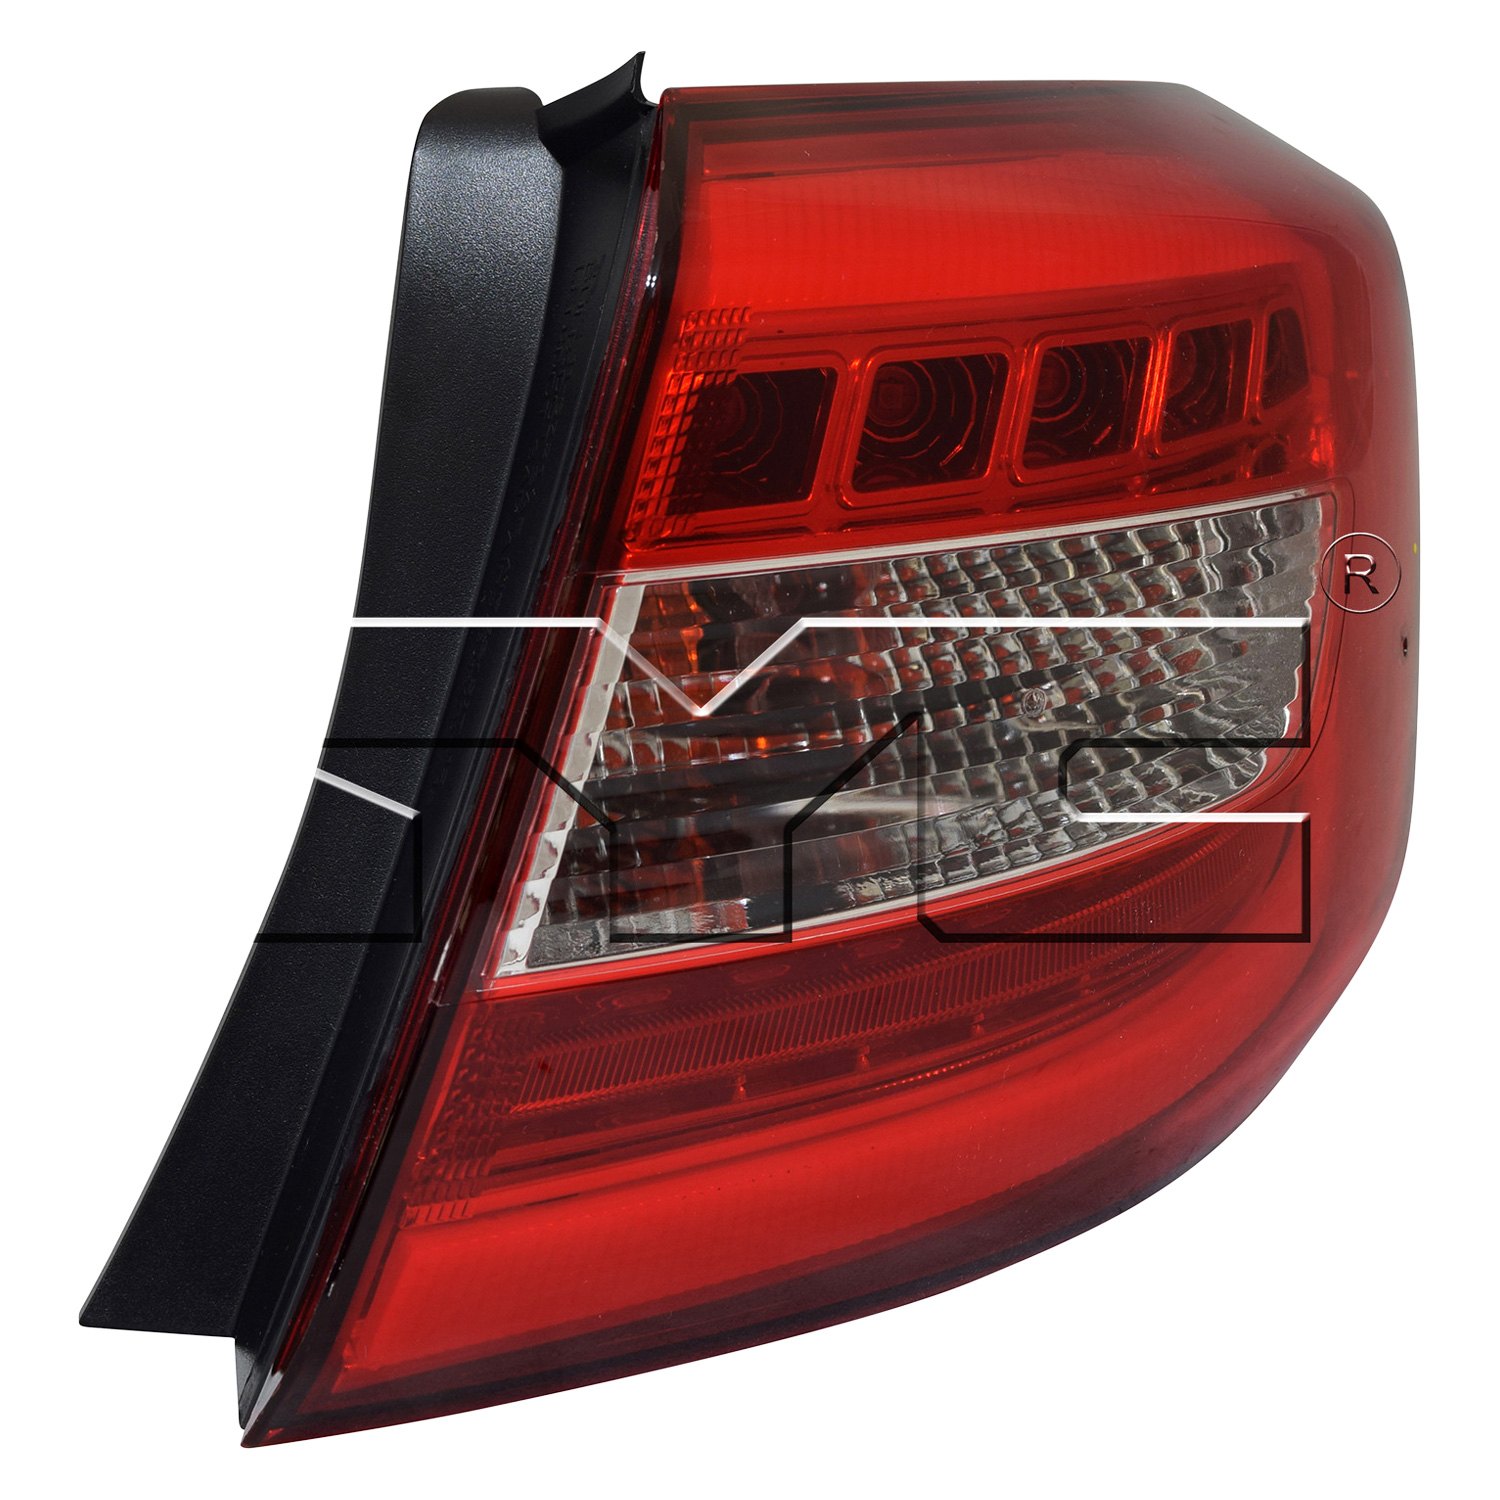 TYC NSF Right Outer Side LED Tail Light Assembly for Hyundai Sonata 2015-2016